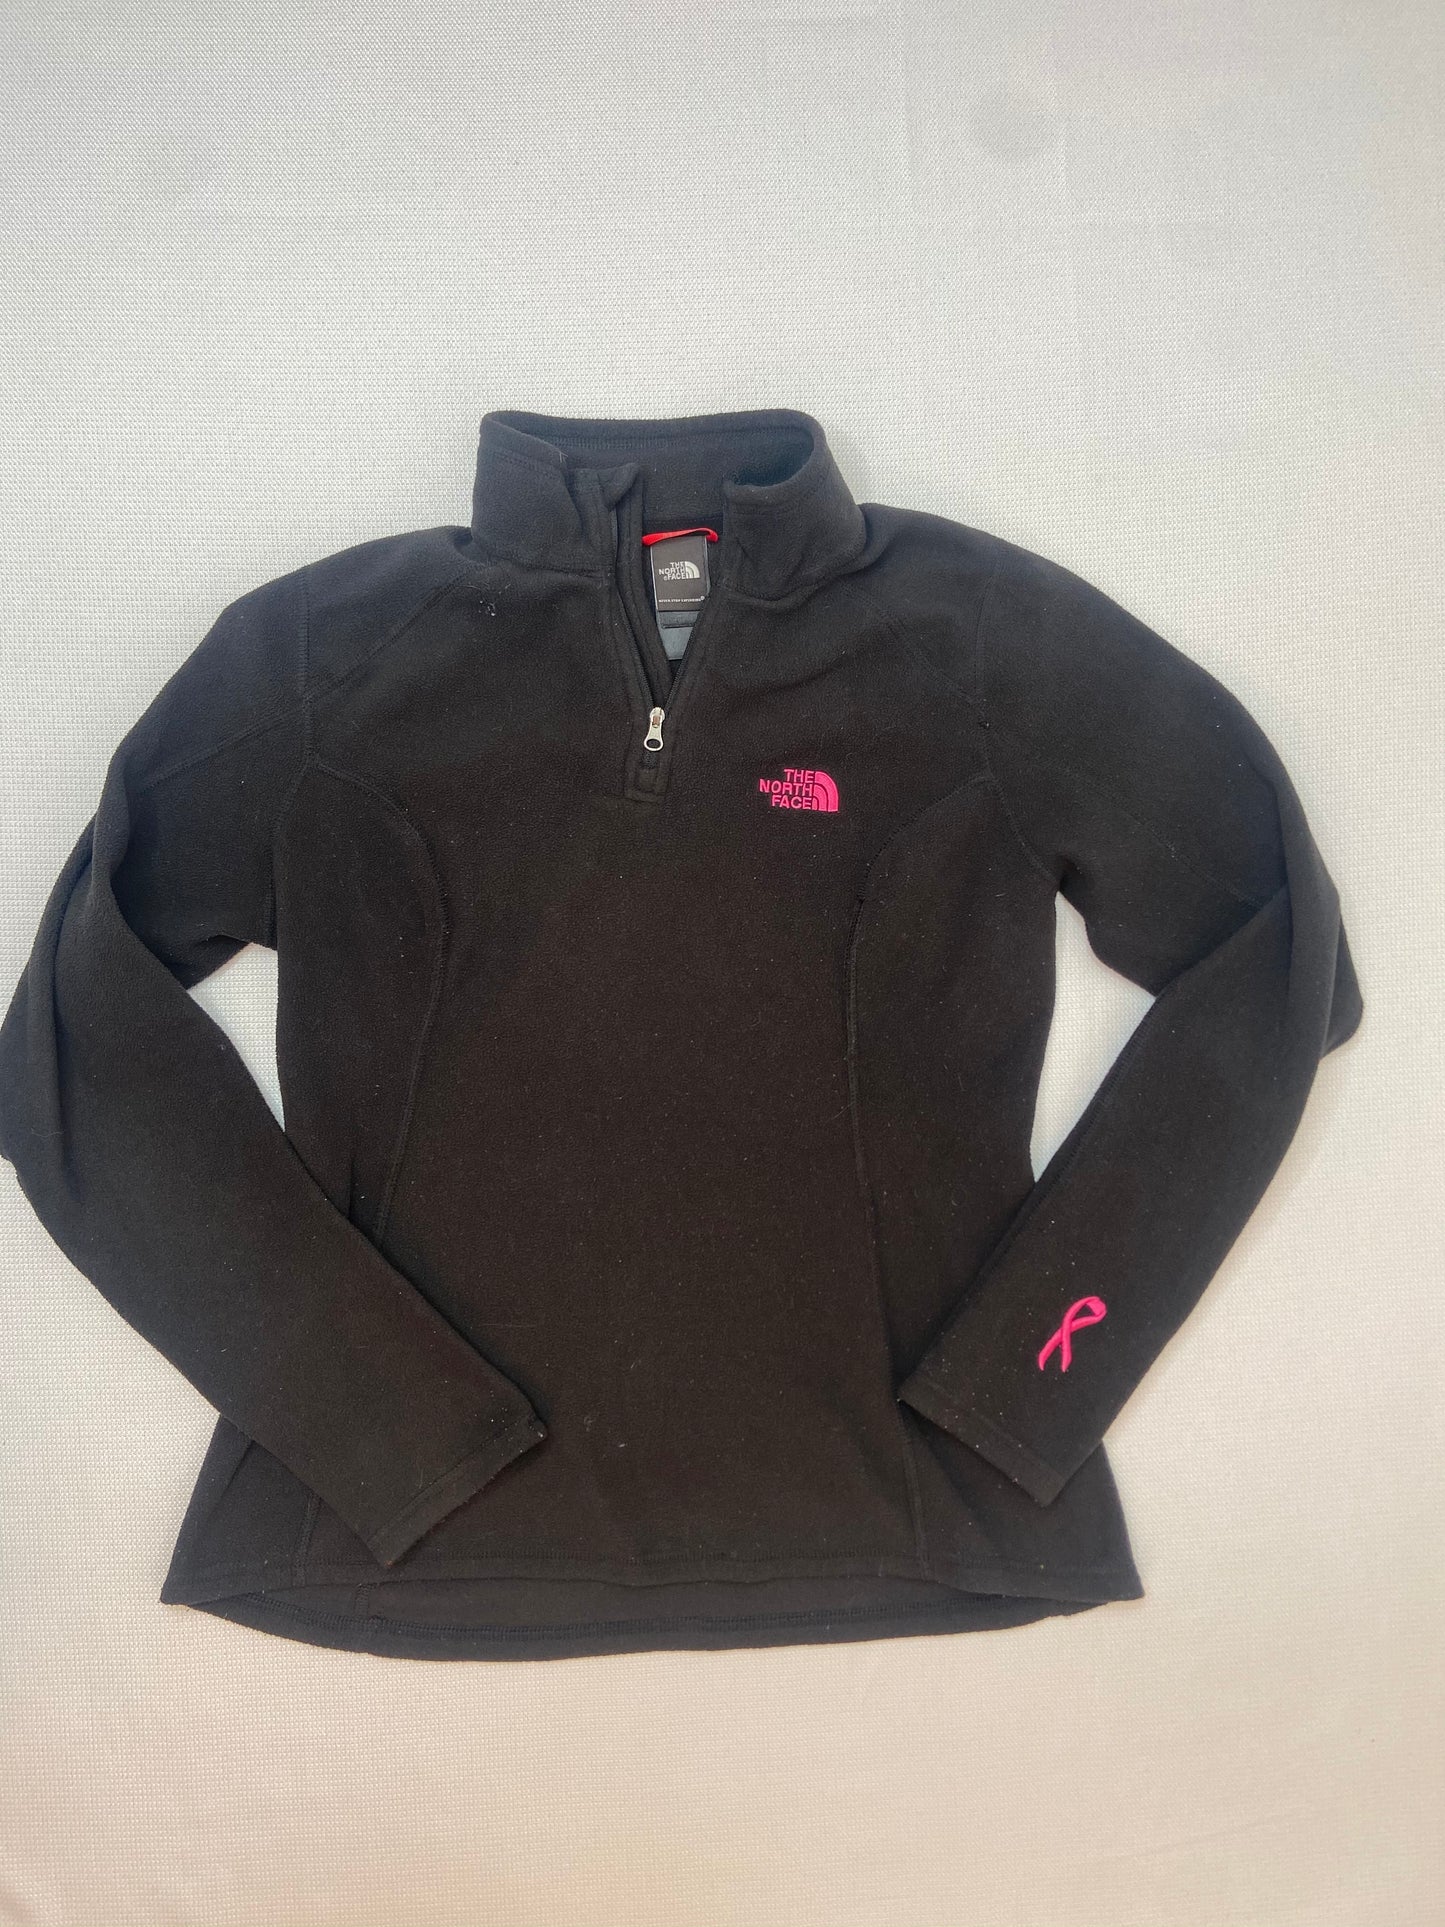 Black and Pink Breast Cancer Awareness Pullover- XS